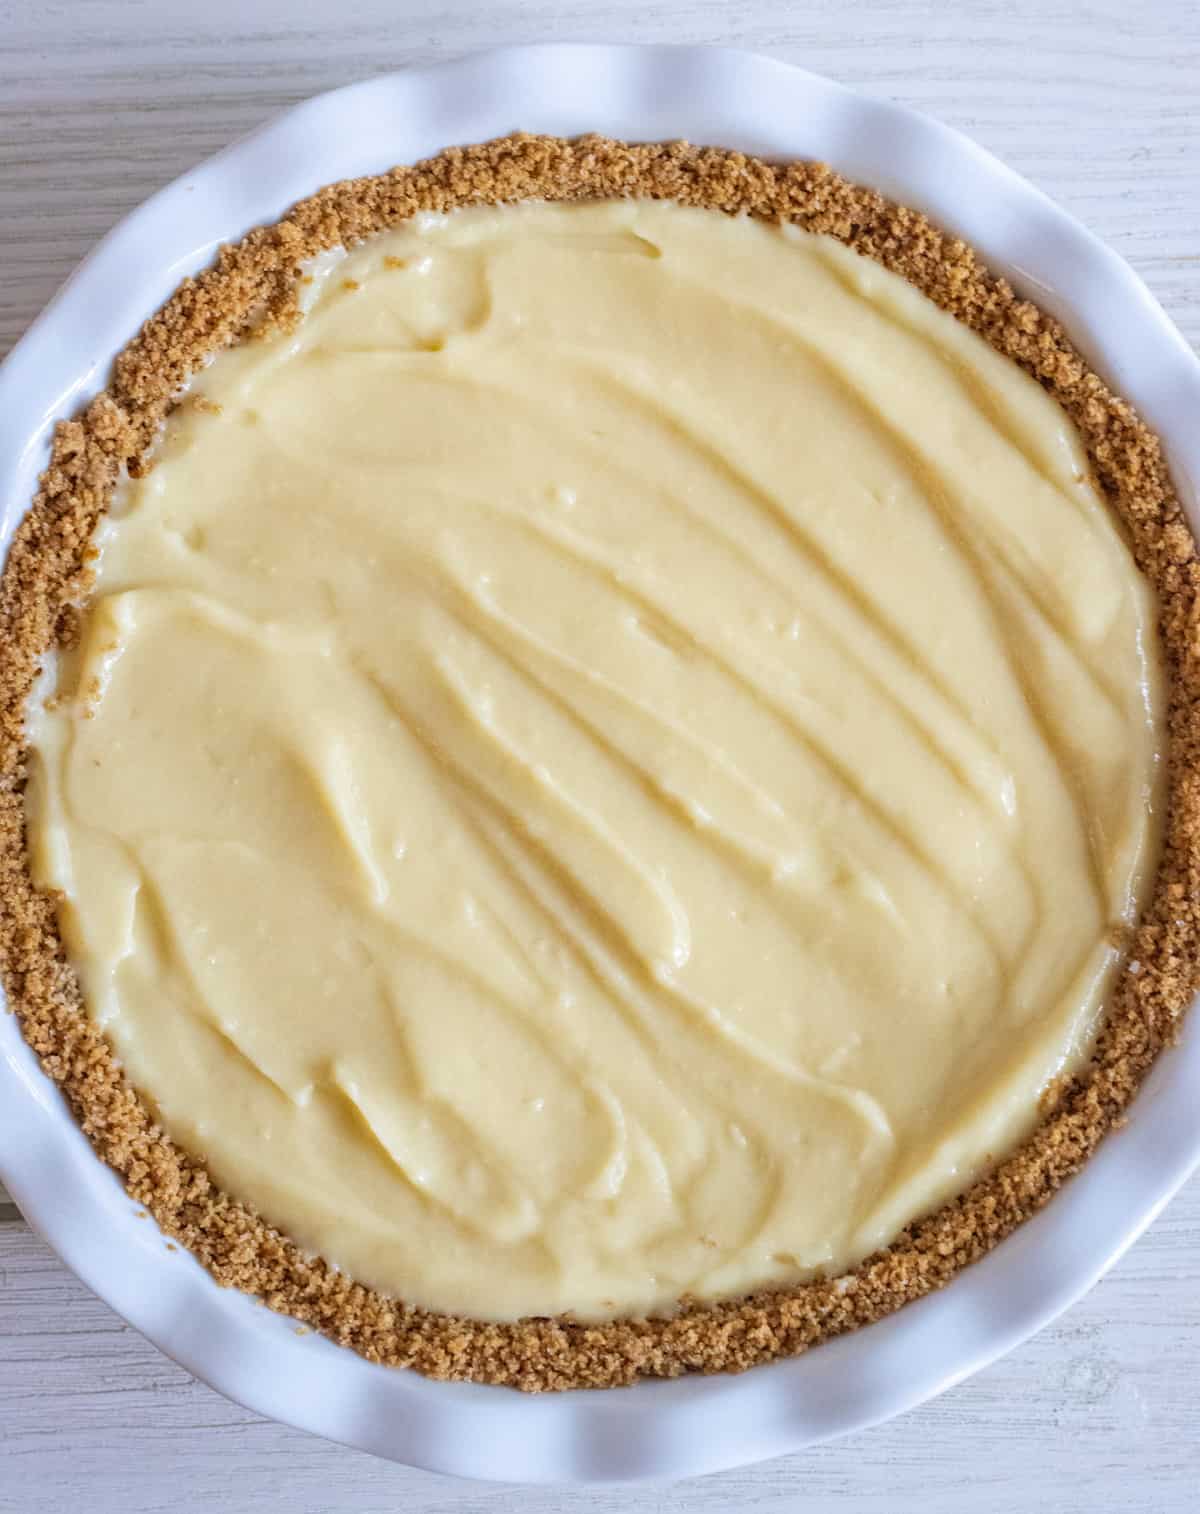 Pineapple cream pie before adding the whipped topping.